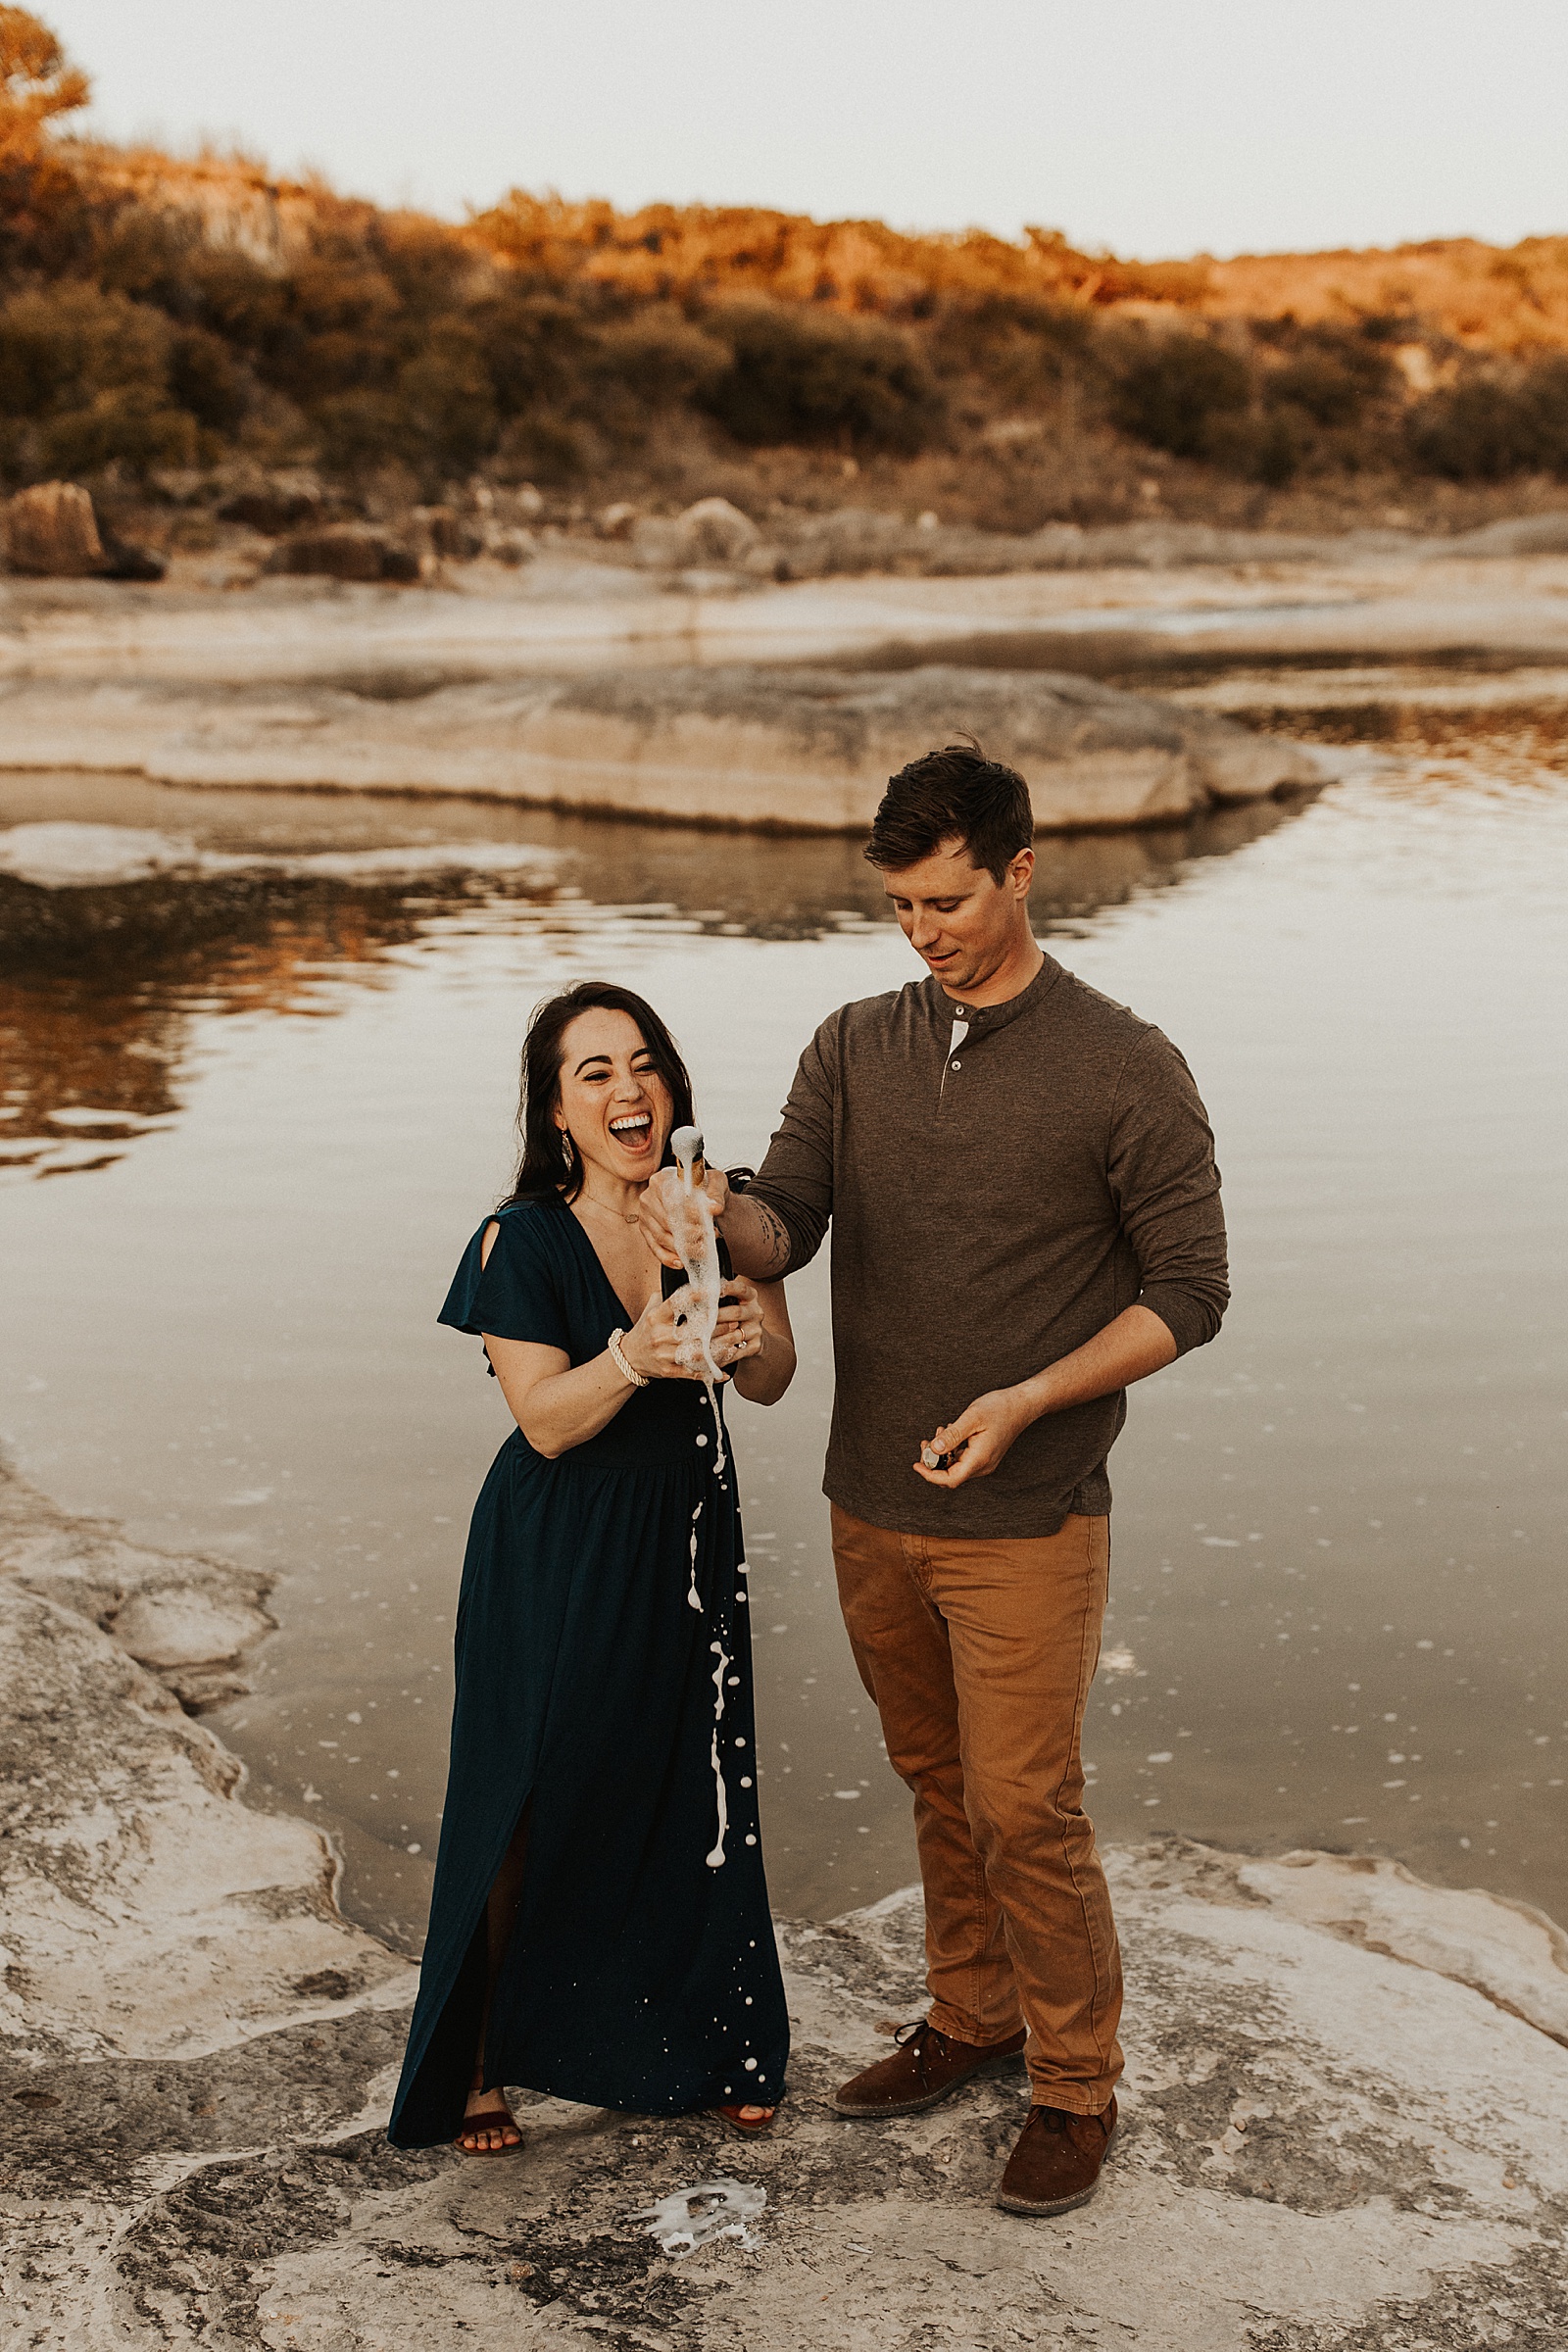 These two enjoyed some pizza and champagne for their Pedernales Falls engagement session in Austin, TX.